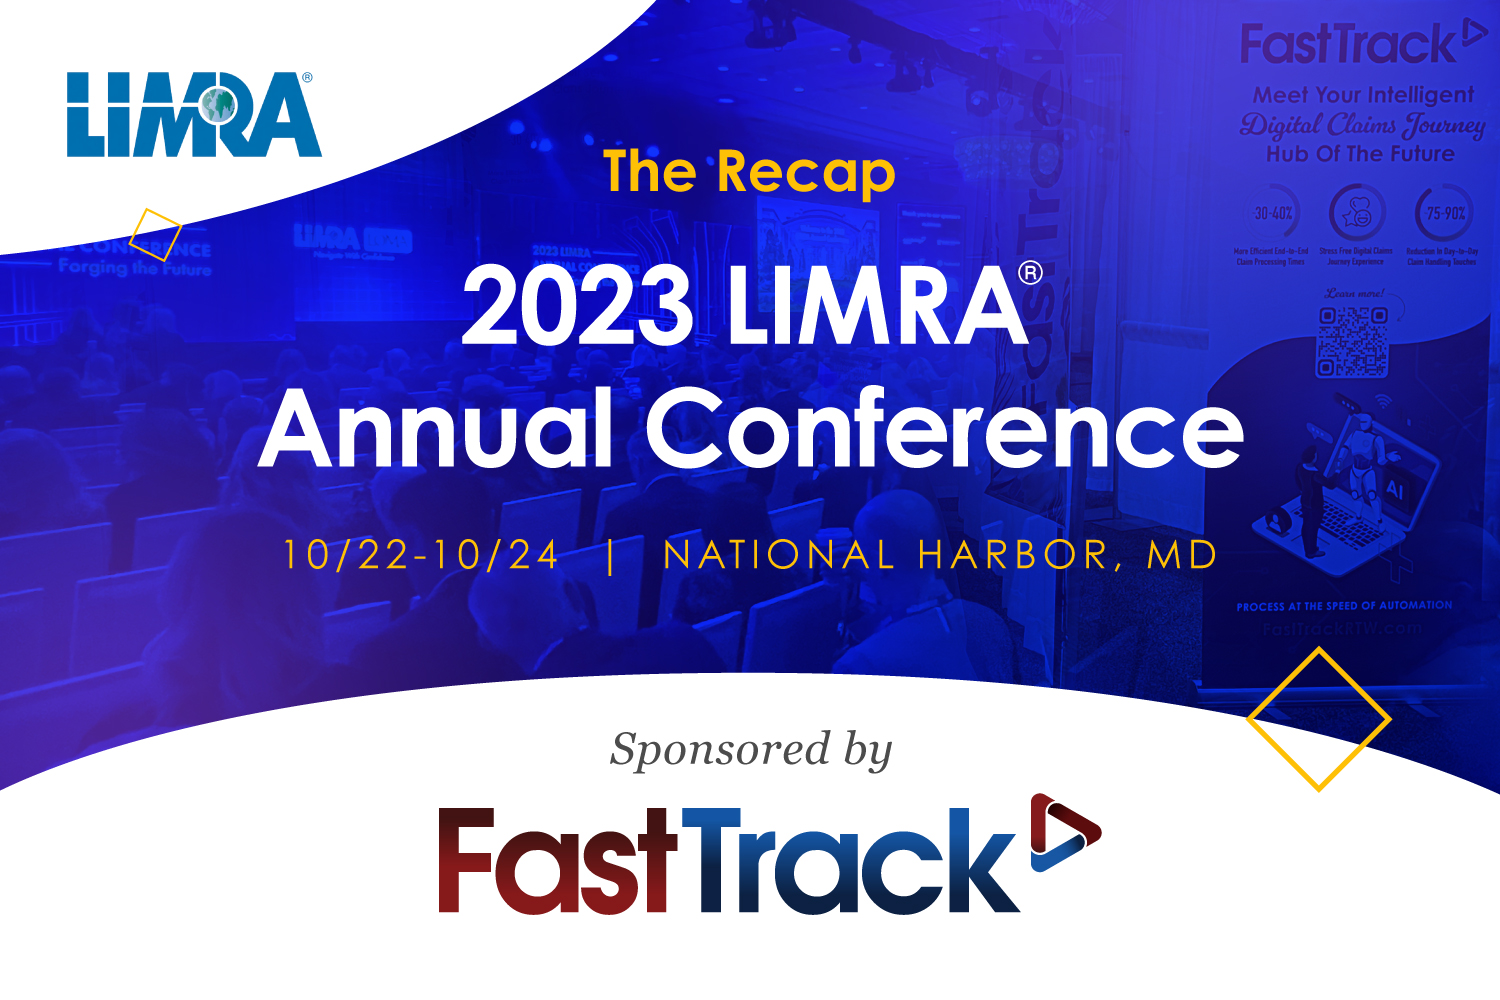 https://fasttrackrtw.com/wp-content/uploads/2023/10/FT_LIMRA_2023AnnualConference_WrapUp_SMgraphic_10-26-23.jpg